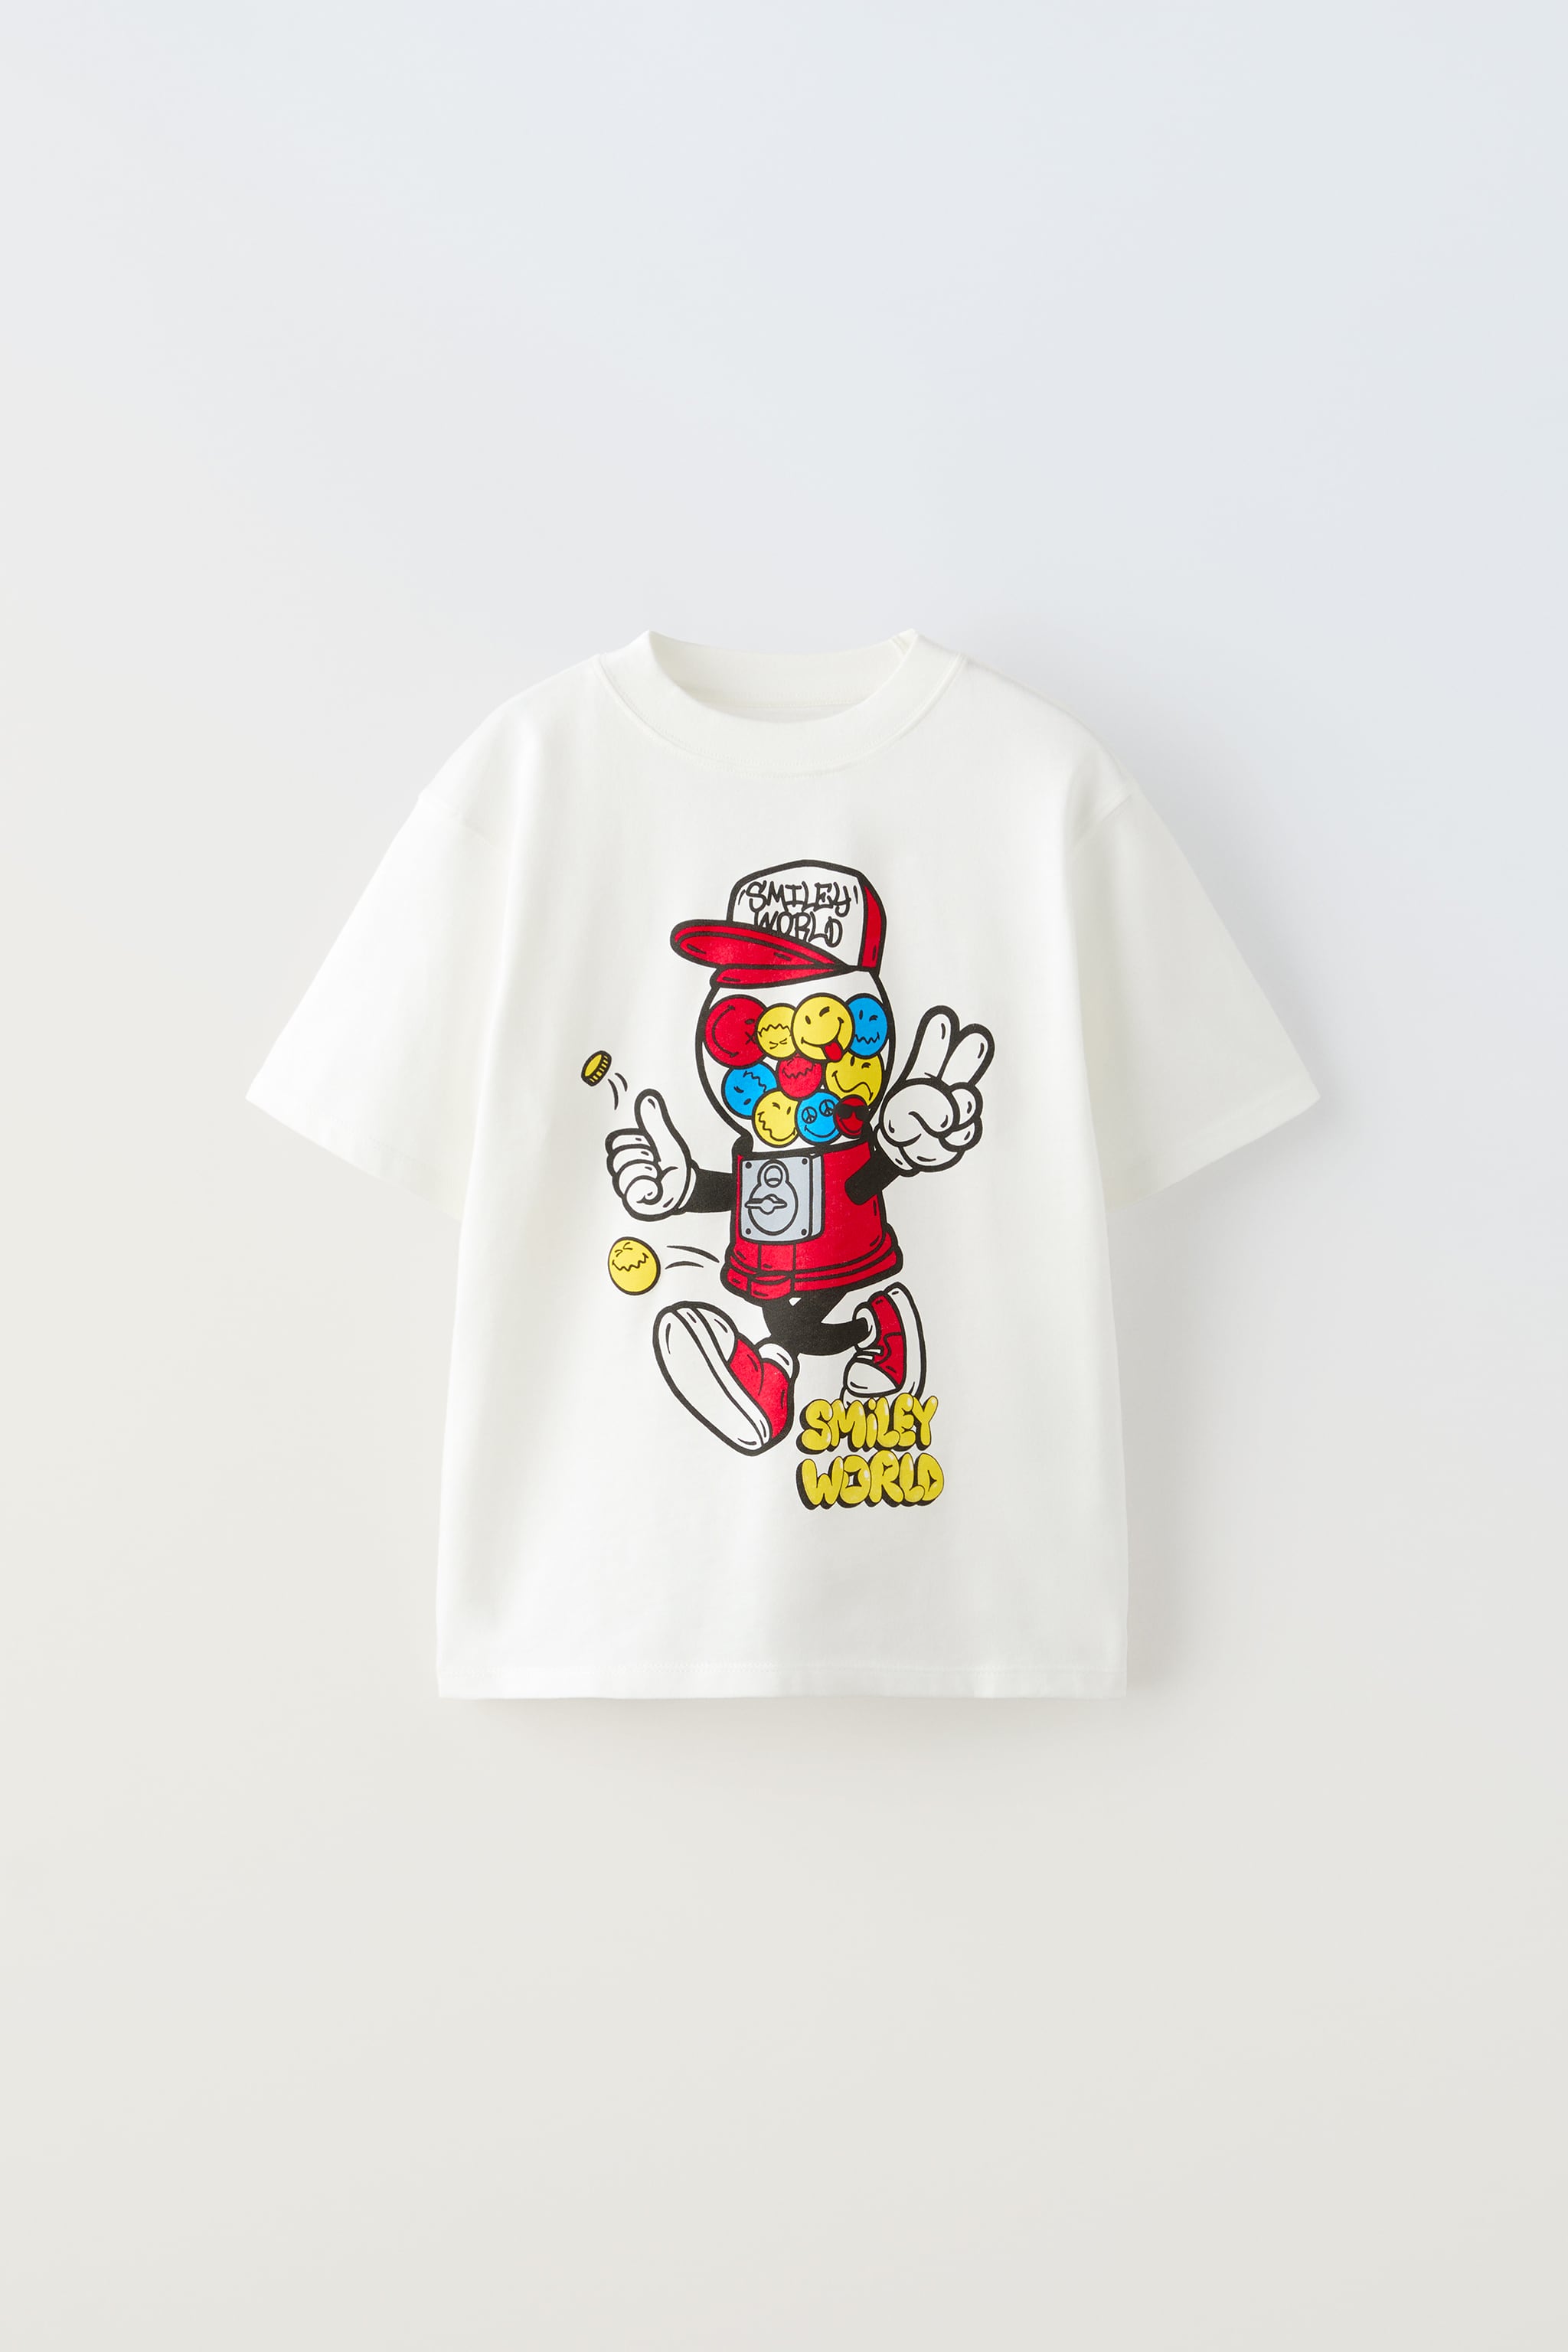 TEXTURED SMILEYWORLD ® HAPPY COLLECTION T-SHIRT